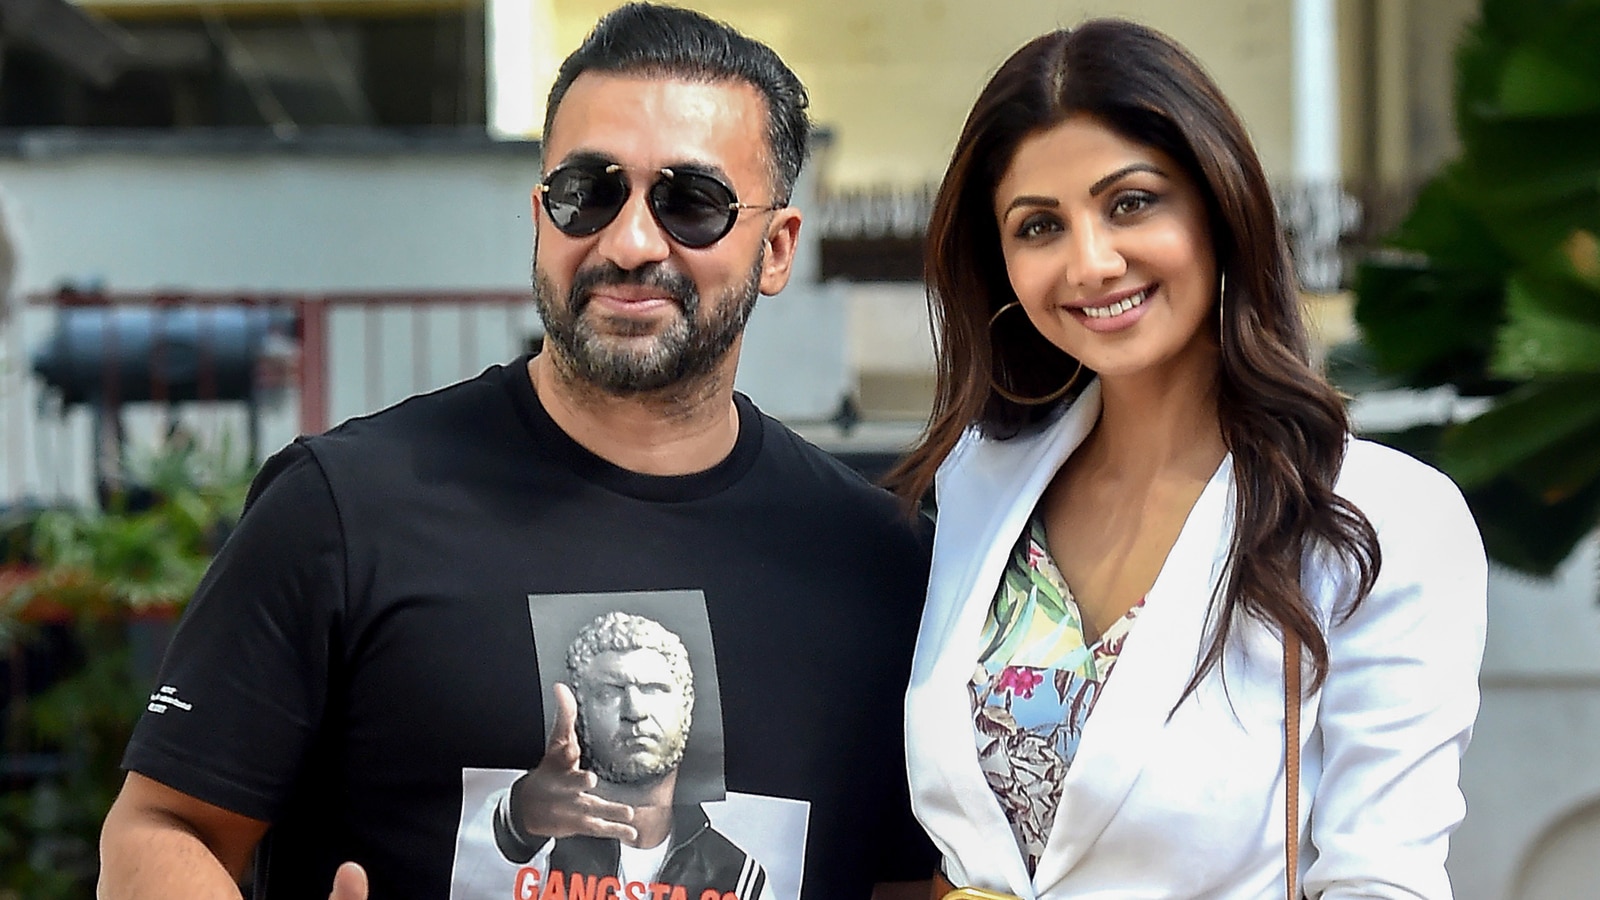 Shilpa Shetty Xnx - Shilpa Shetty's message on 'bad decisions' and 'new ending' amid Raj Kundra  controversy | Bollywood - Hindustan Times